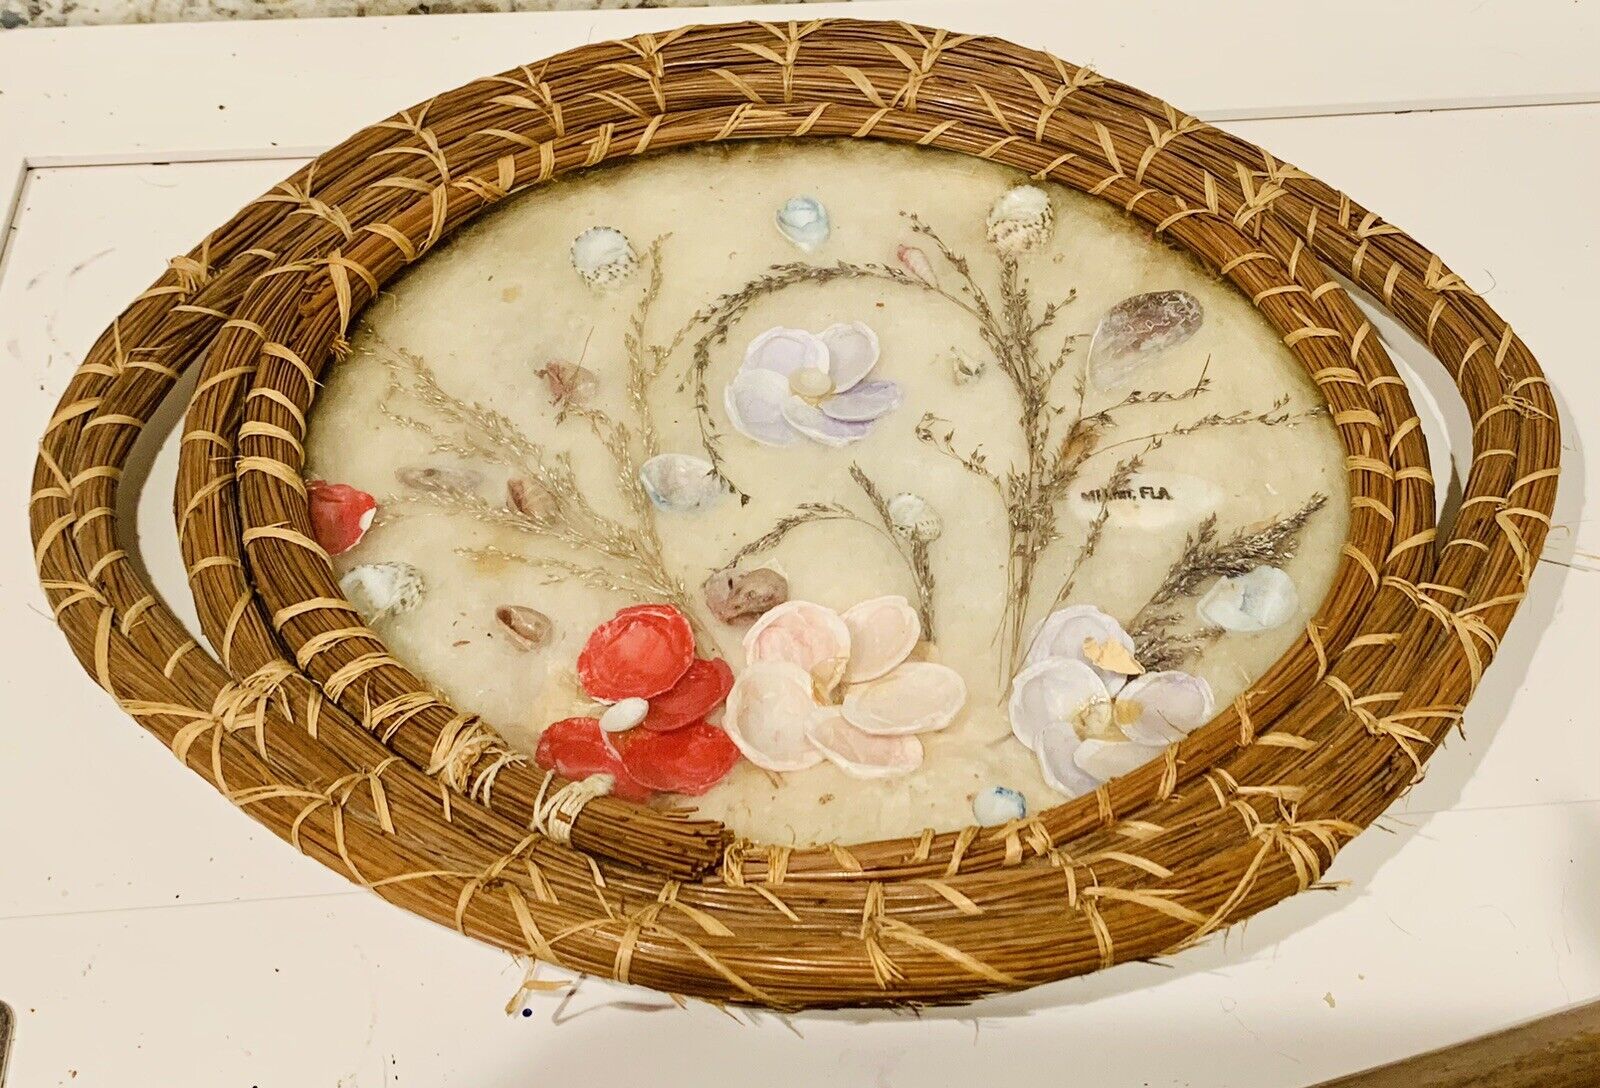 Vintage Seashell Art Oval Rattan Curved Glass 8×10 1970s Floral Depiction